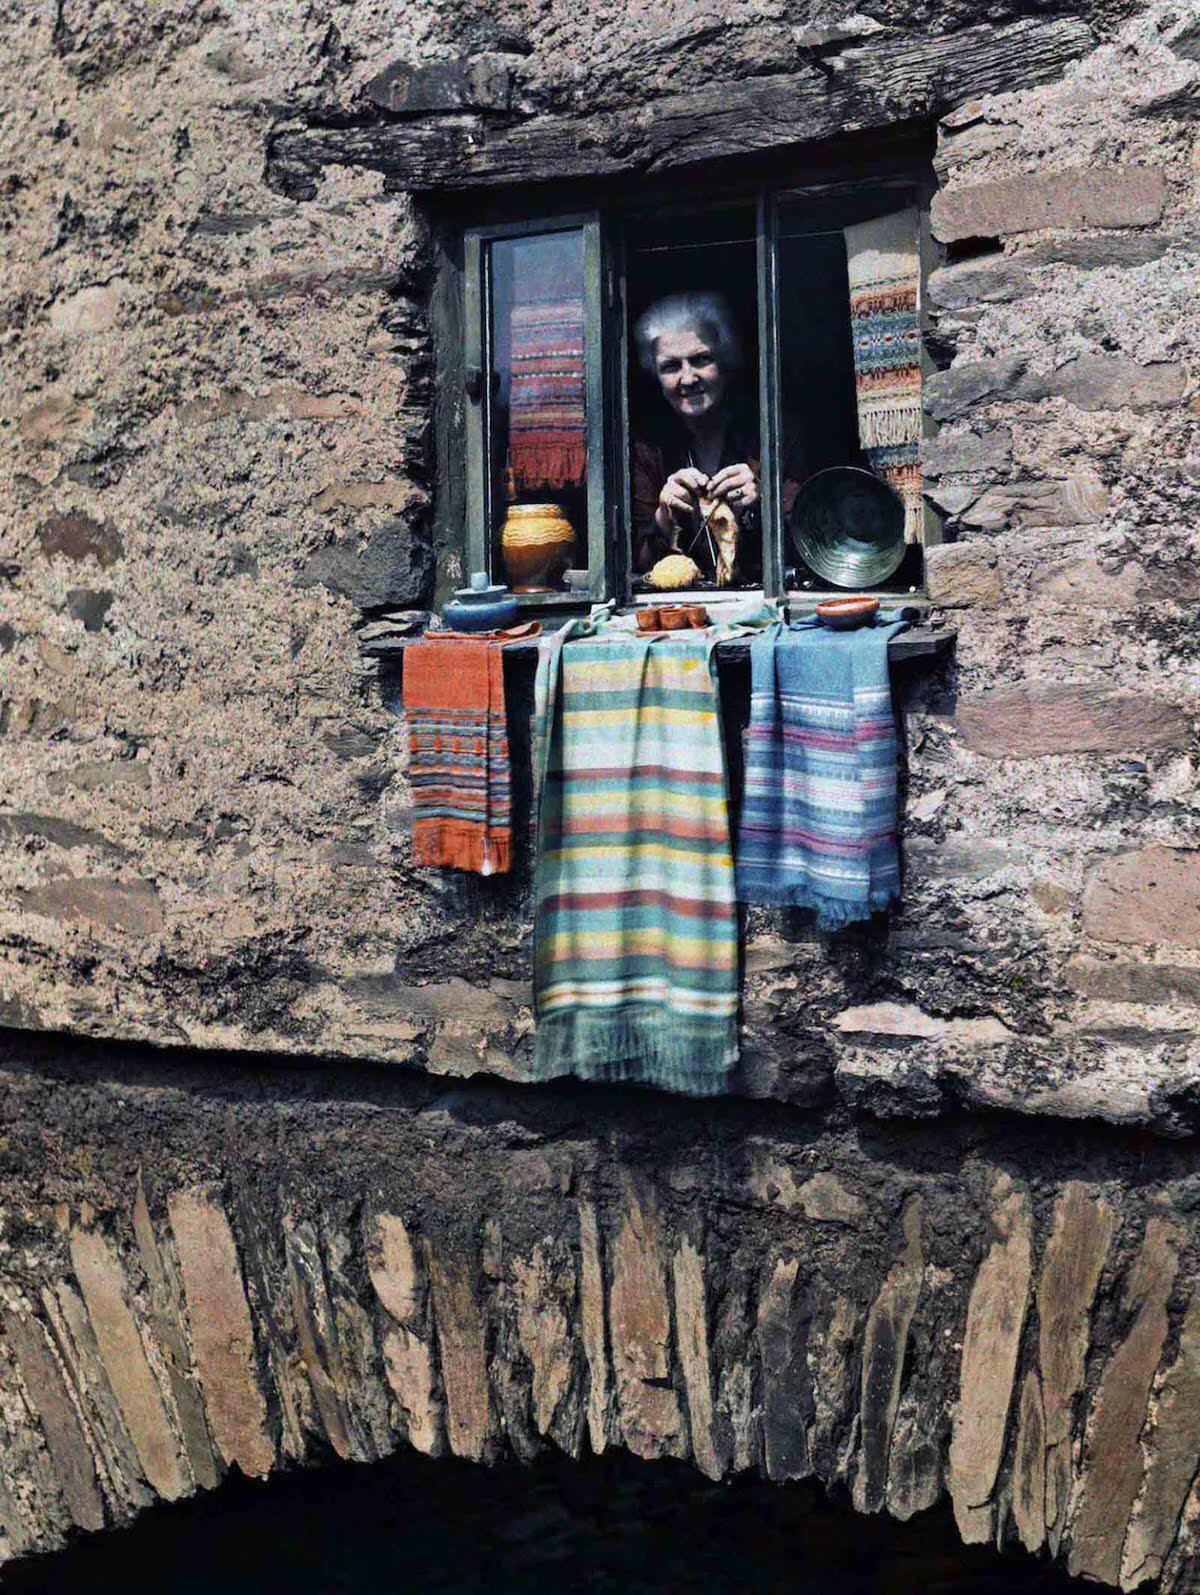 A woman sticks her head out of her bridge house window, in Ambleside, Lake District, Cumbria, England.